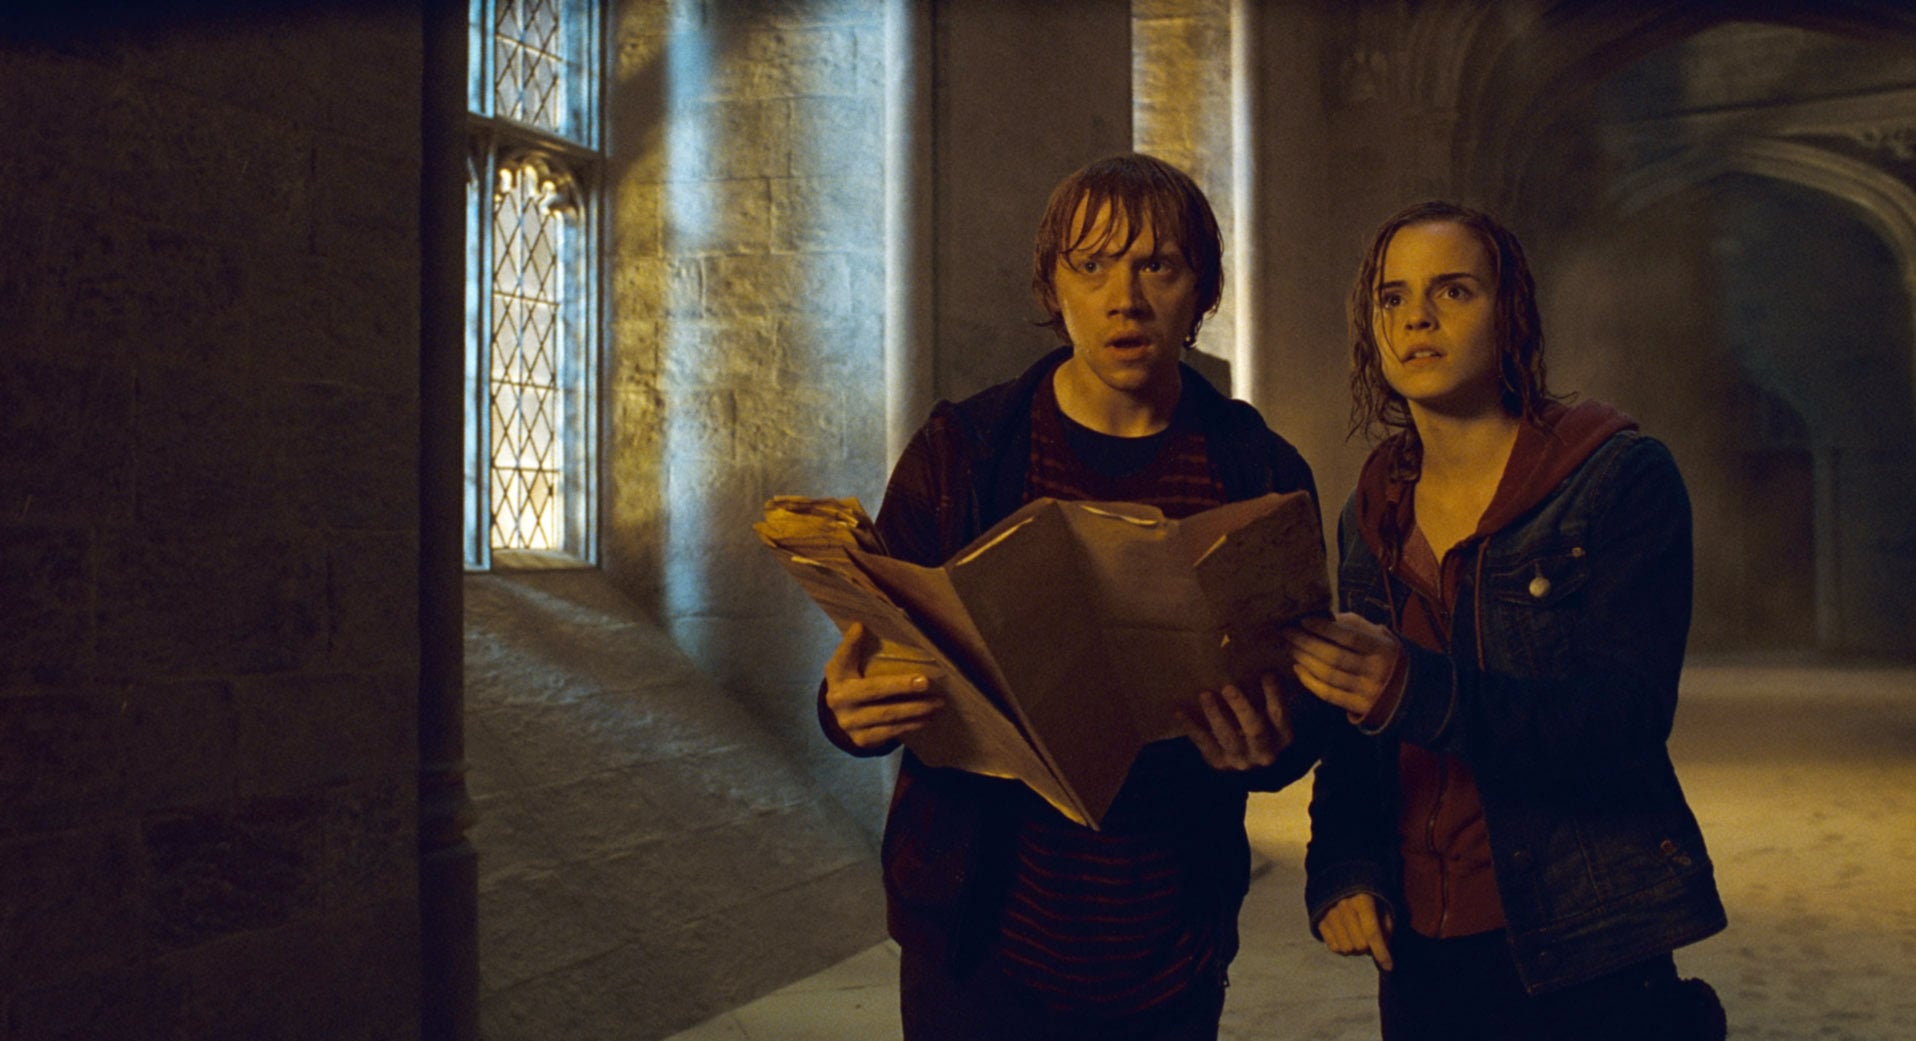 HARRY POTTER AND THE DEATHLY HALLOWS: PART 2, from left: Rupert Grint, Emma Watson, 2011. 2011 Warner Bros. Ent. Harry Potter publishing rights J.K.R. Harry Potter characters, names and related indicia are trademarks of and Warner Bros. Ent. All rights reserved./Courtesy Everett Collection